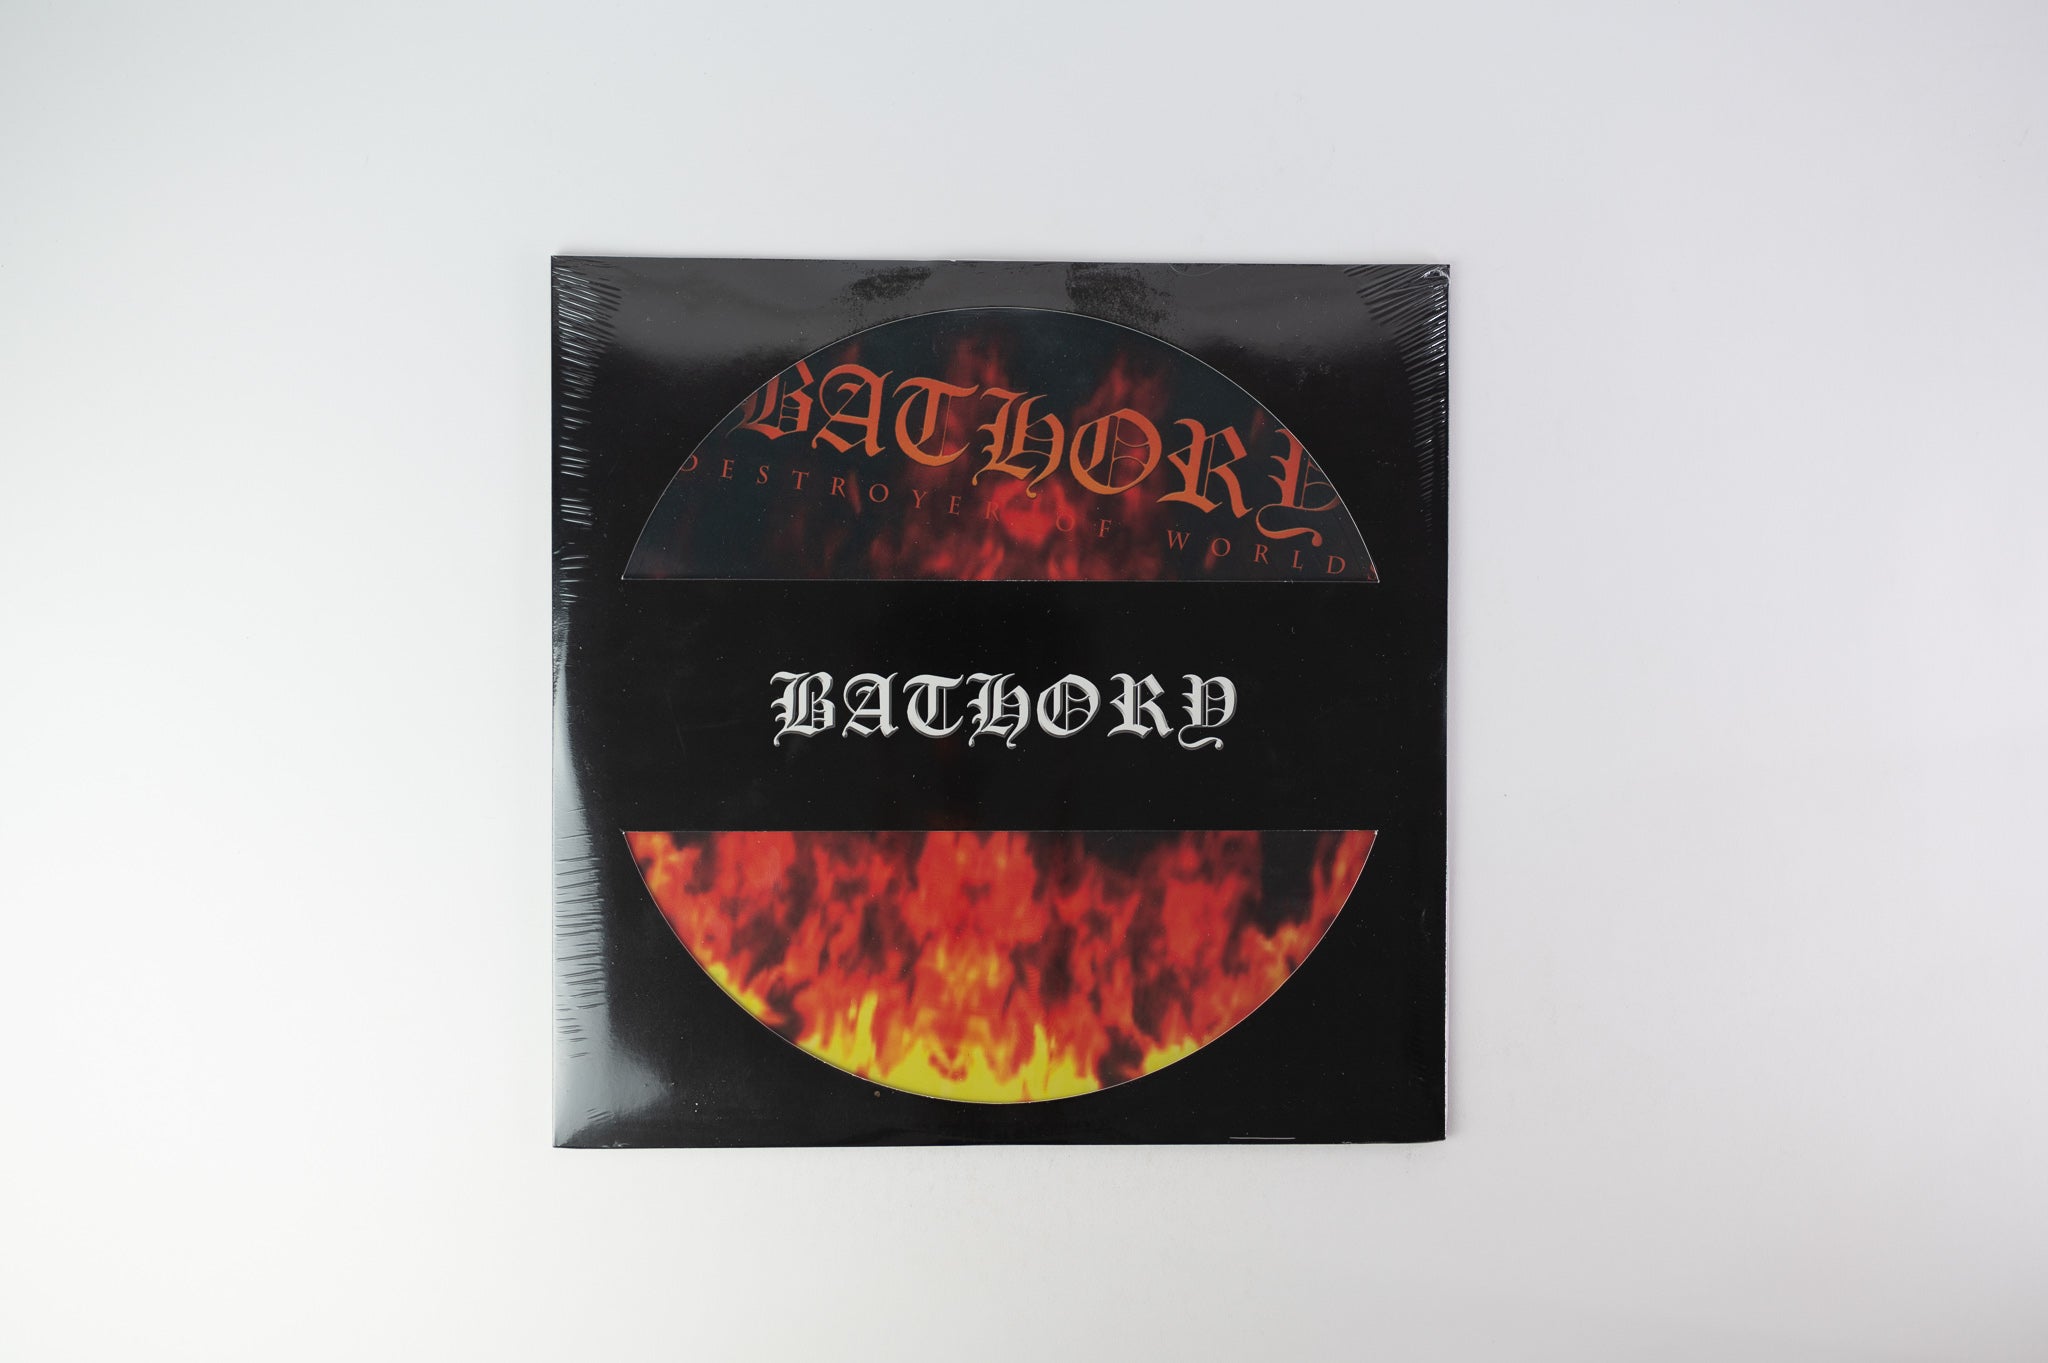 Bathory - Destroyer Of Worlds on Black Mark Limited Edition Picture Disc Reissue Sealed